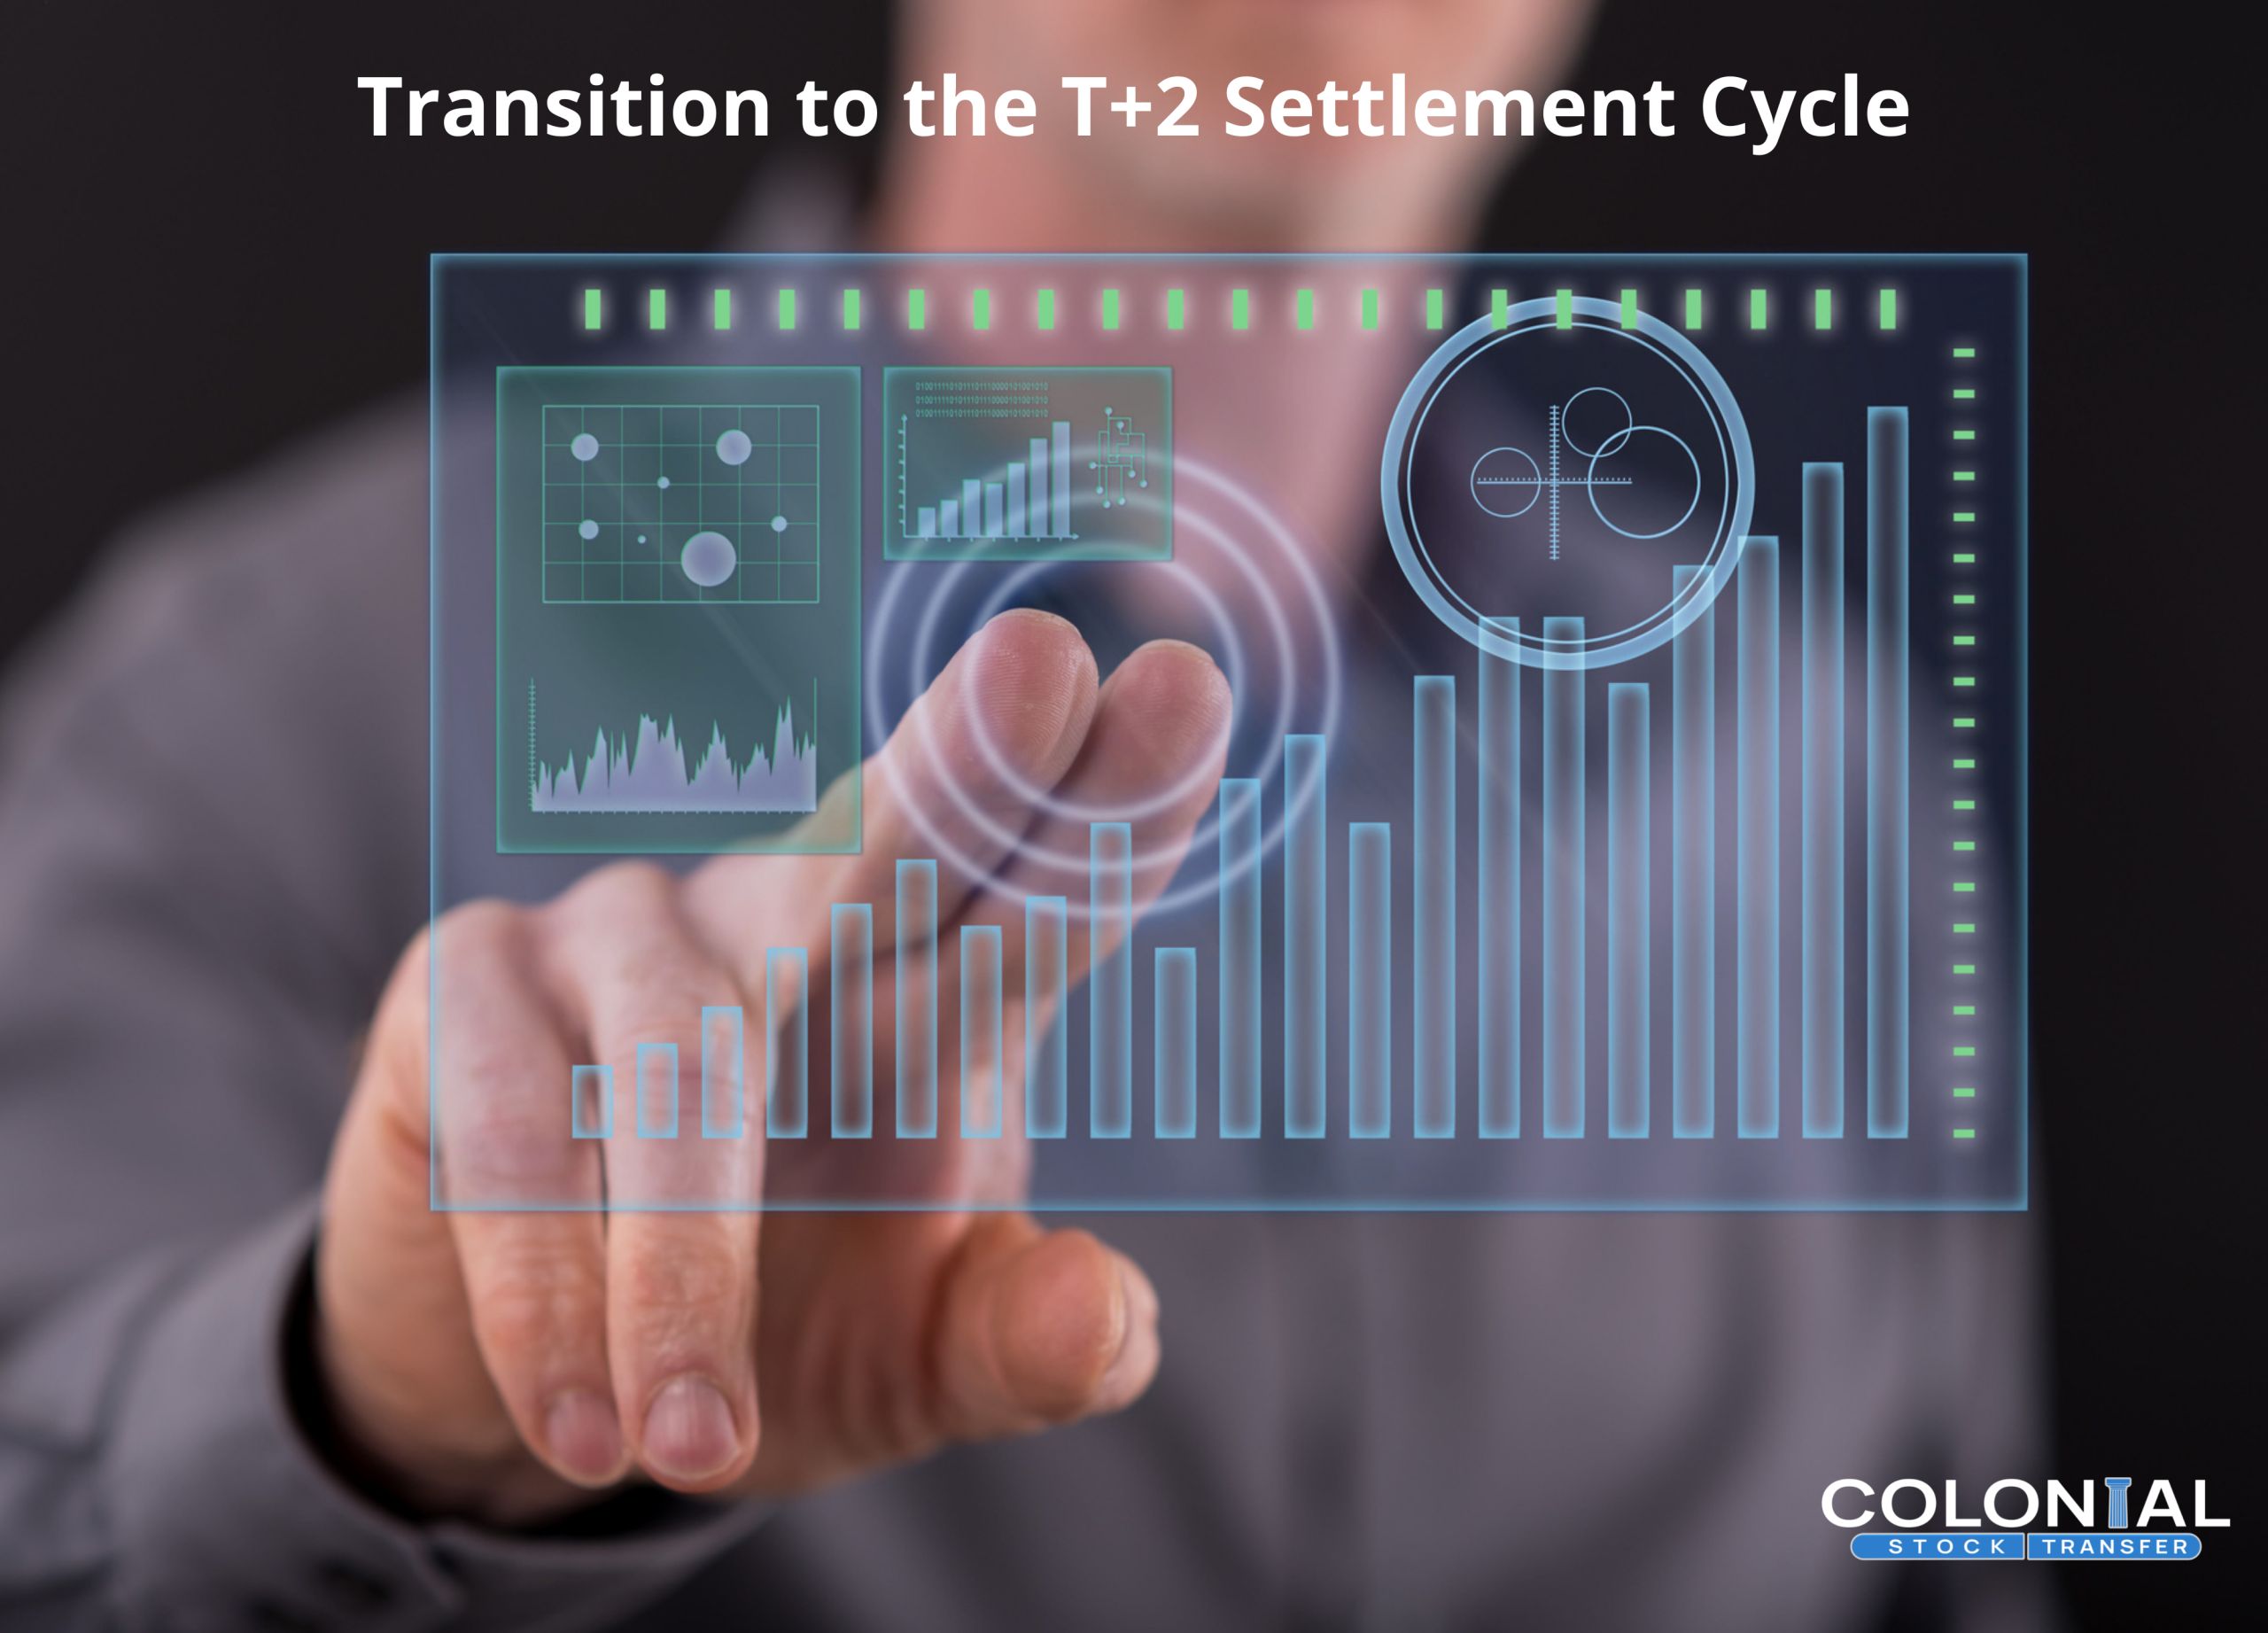 Transition to the T+2 Settlement Cycle